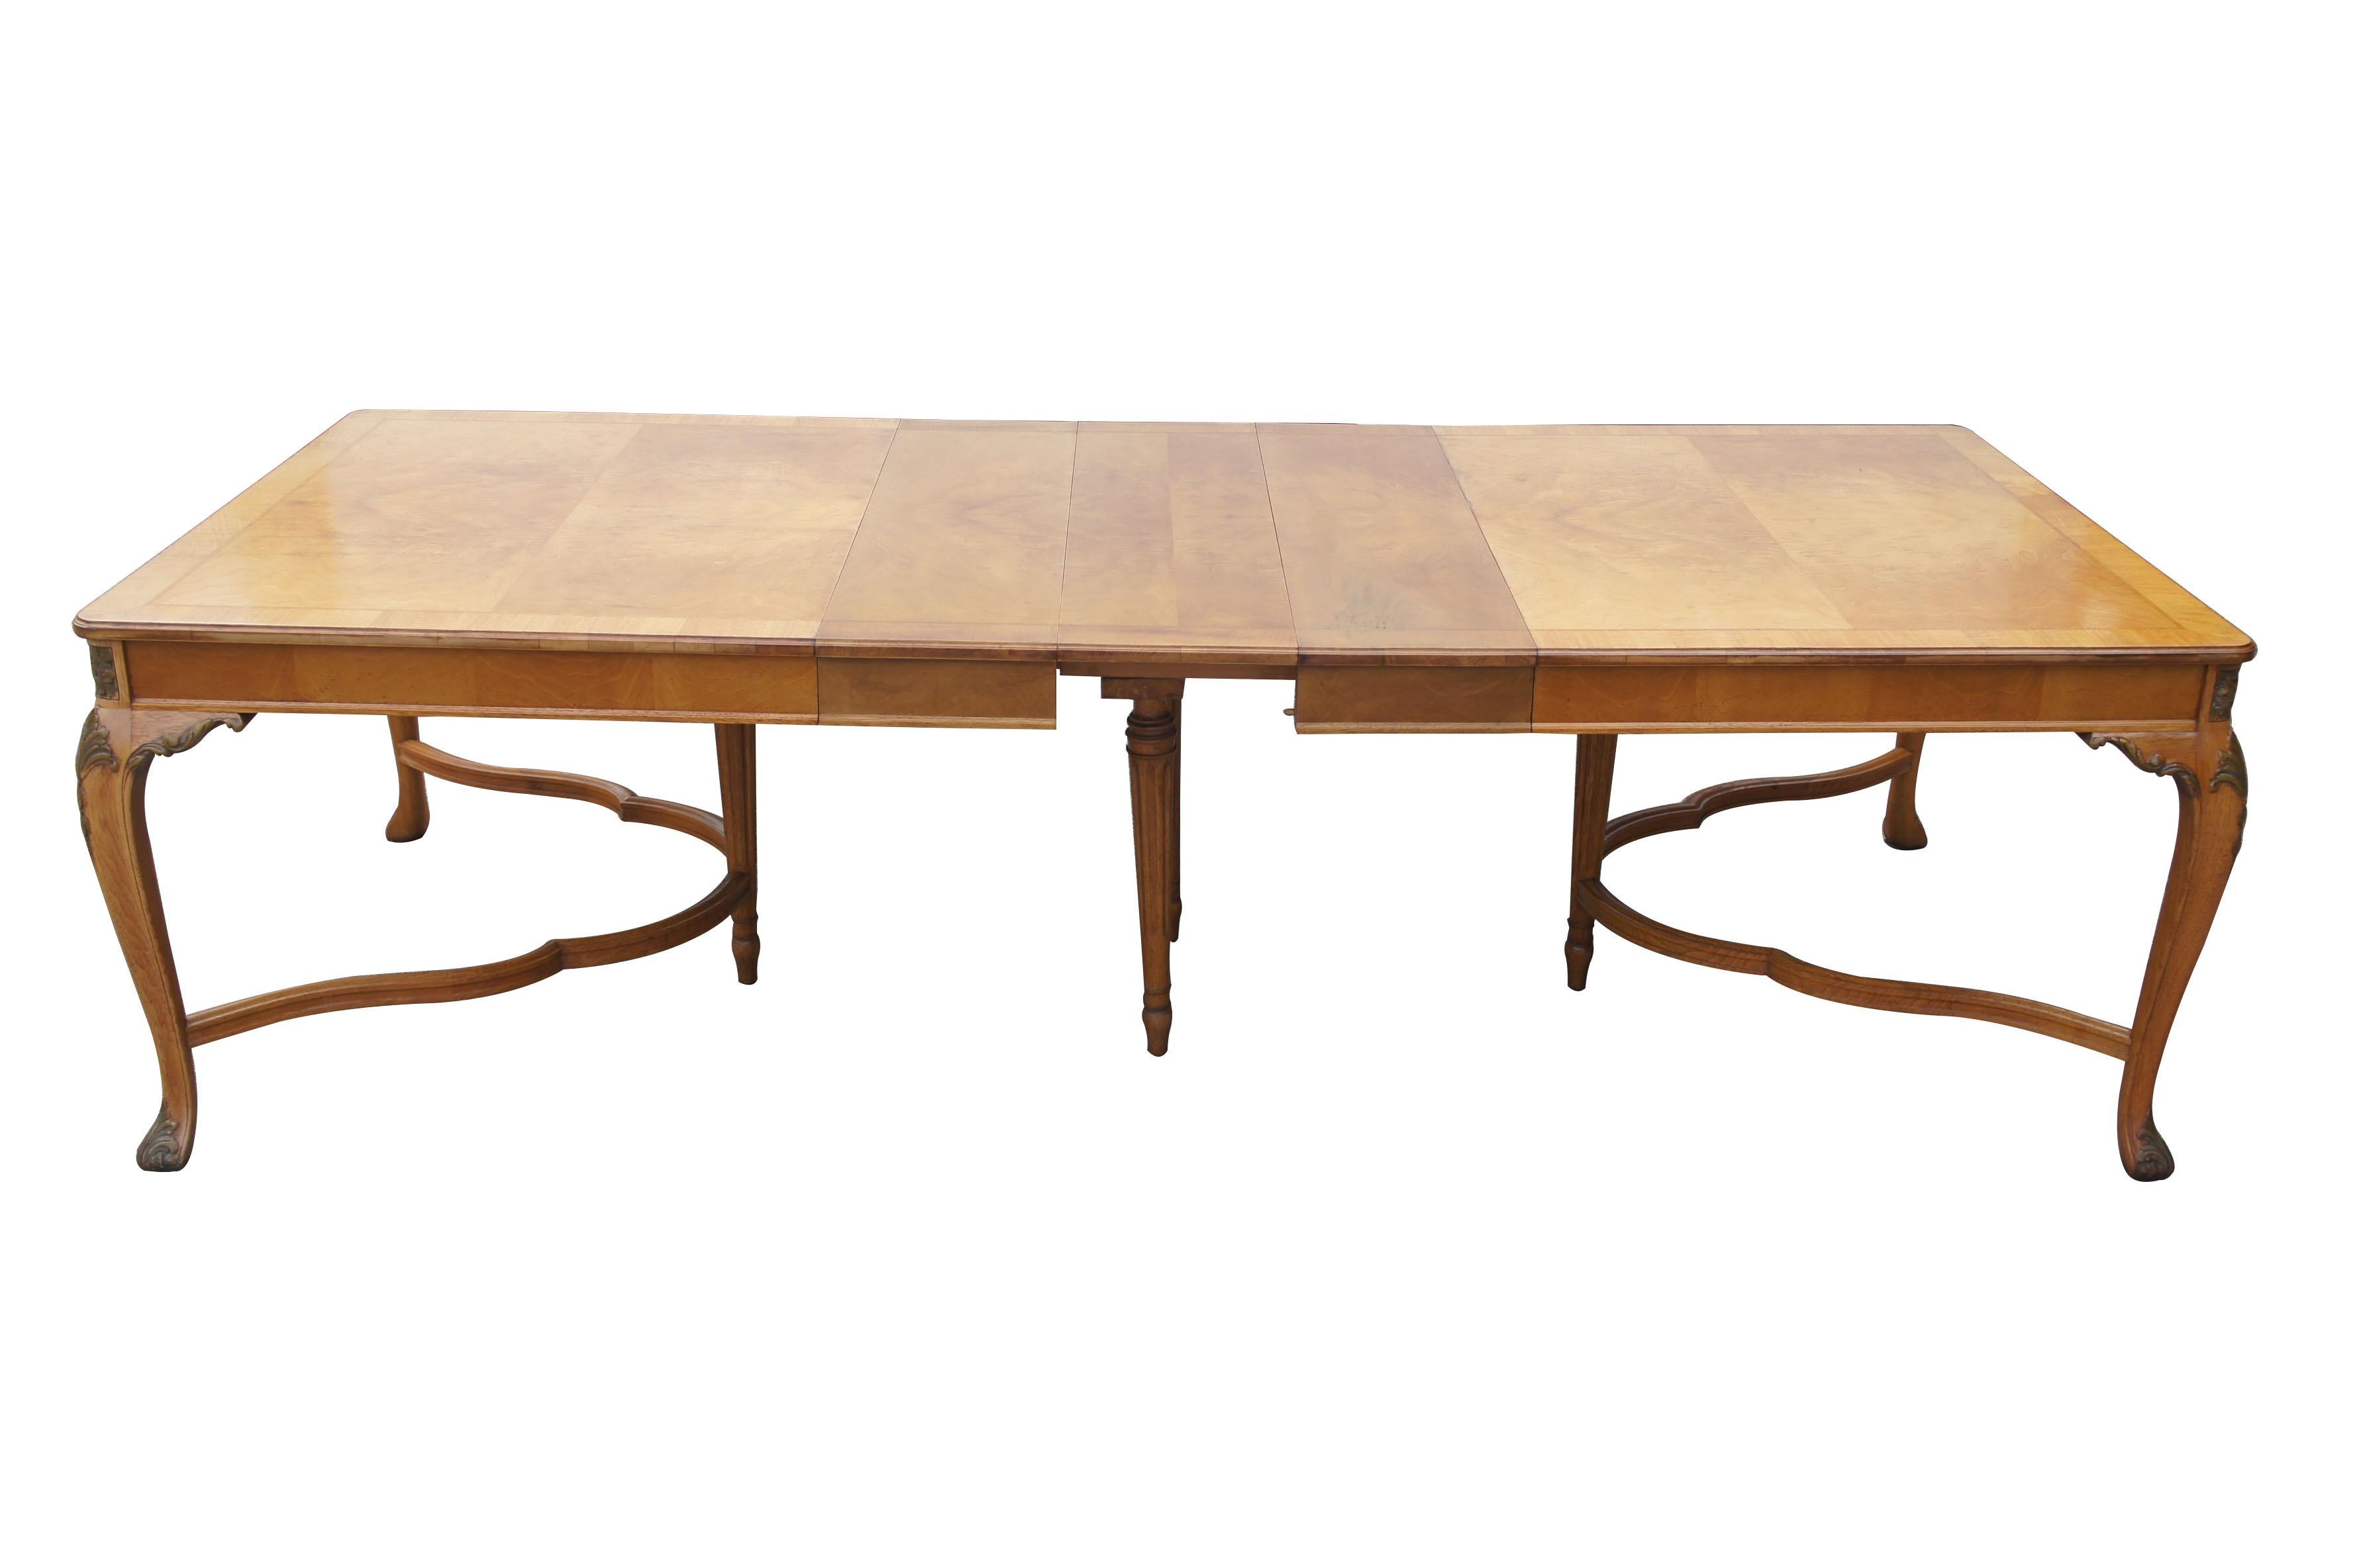 (1919-1953)
Irwin, Robert W. Co
Grand Rapids, Mi

An exquisite French walnut dining table by Robert Irwin Furniture Company. Elegantly designed with crotch walnut veneered top. Includes an inlaid band around the top, and acanthus carvings